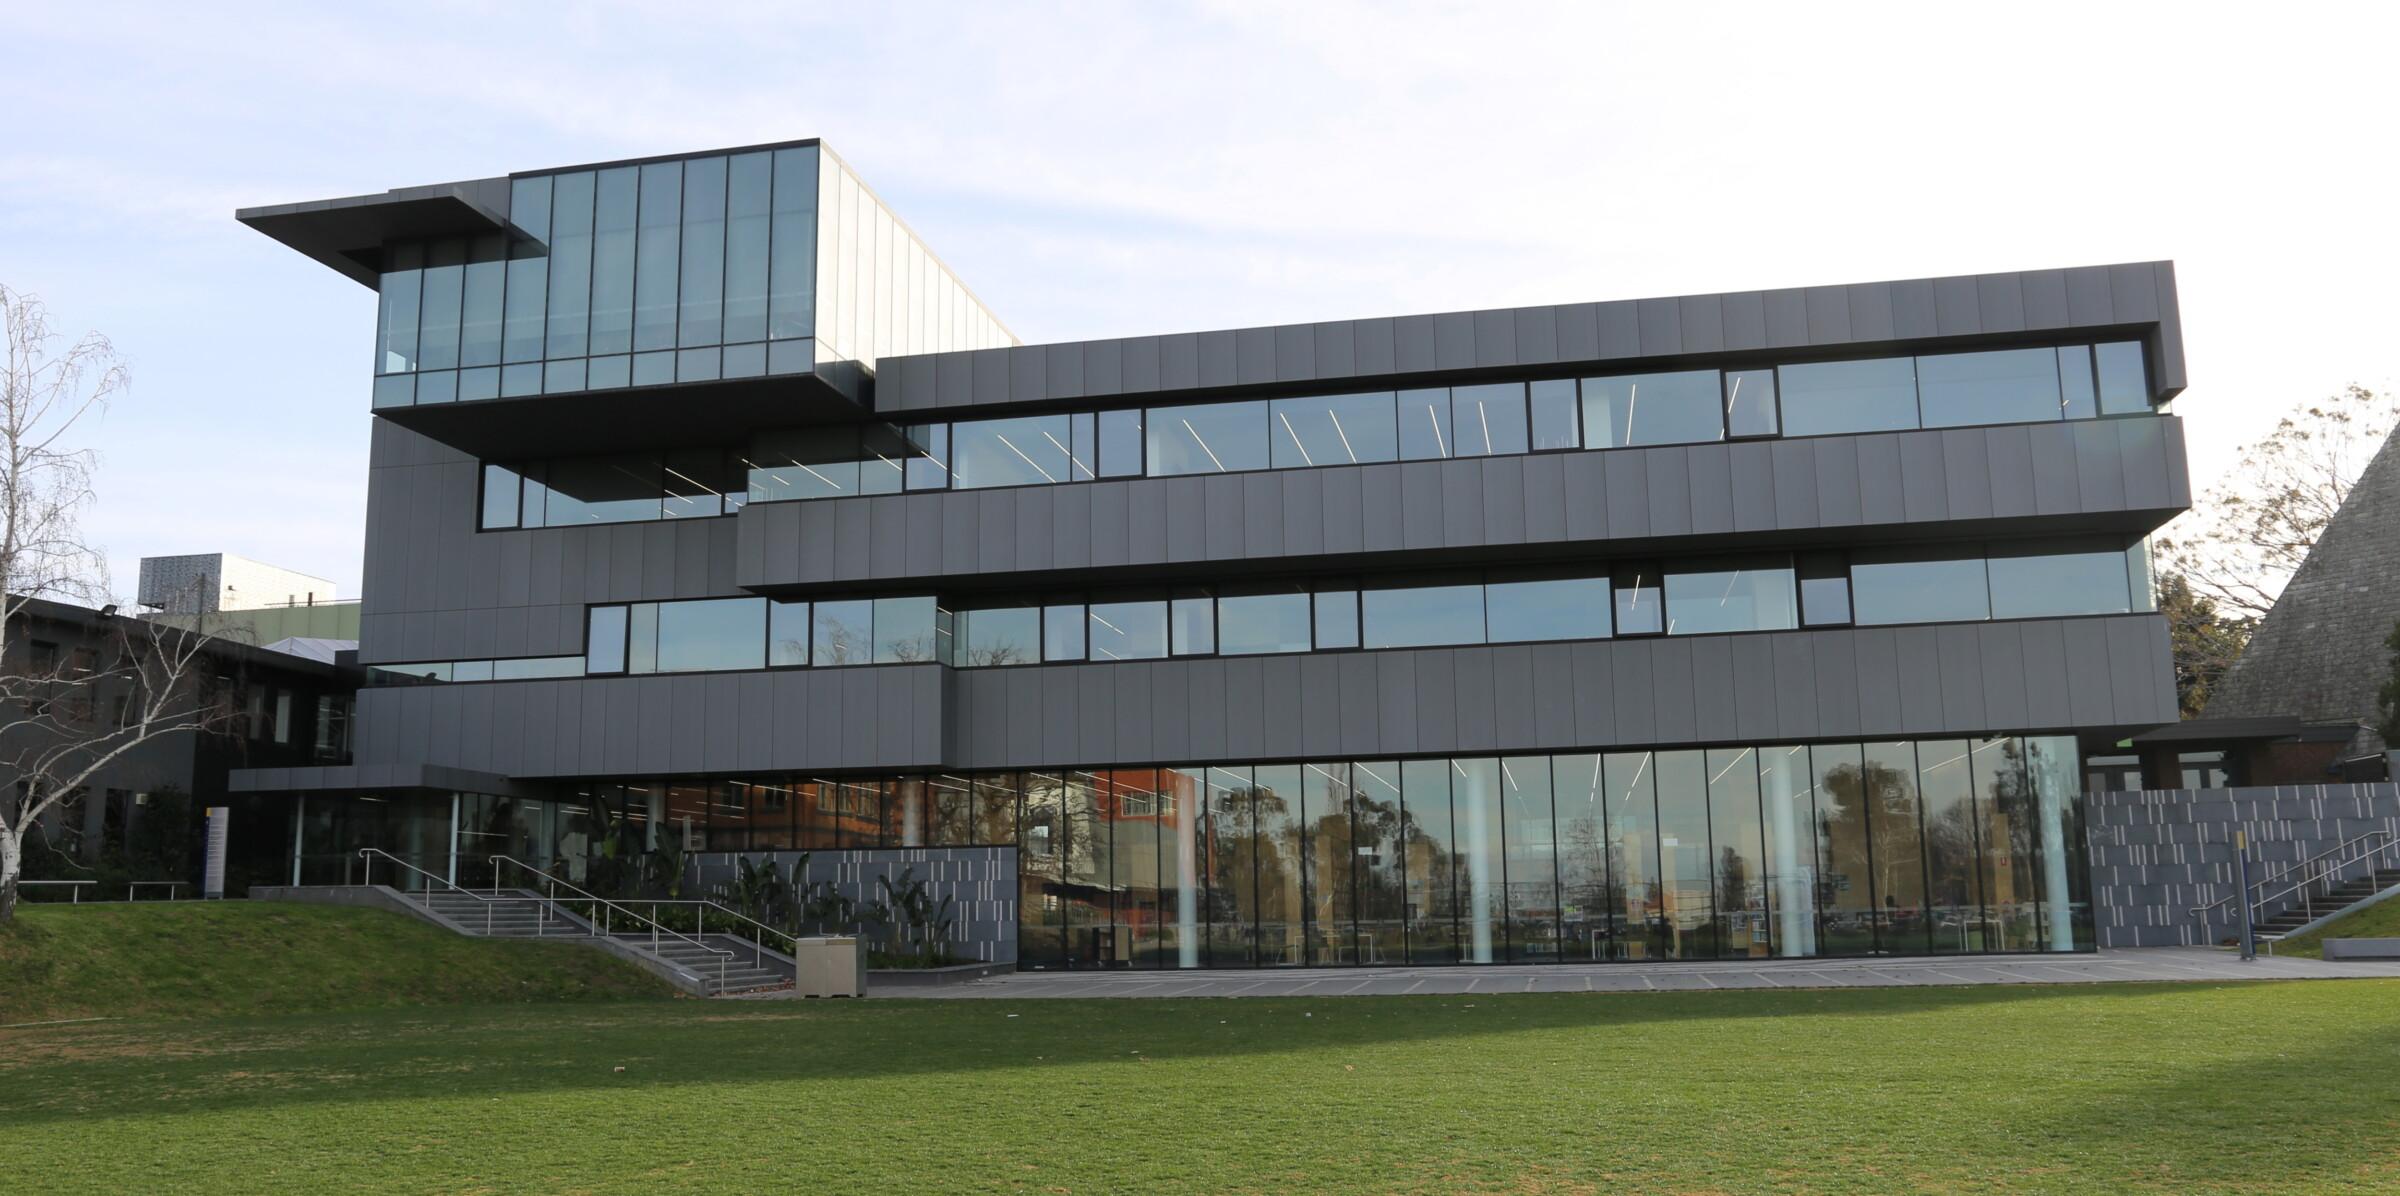 The Grutzner Centre for Learning and Innovation (CLI)